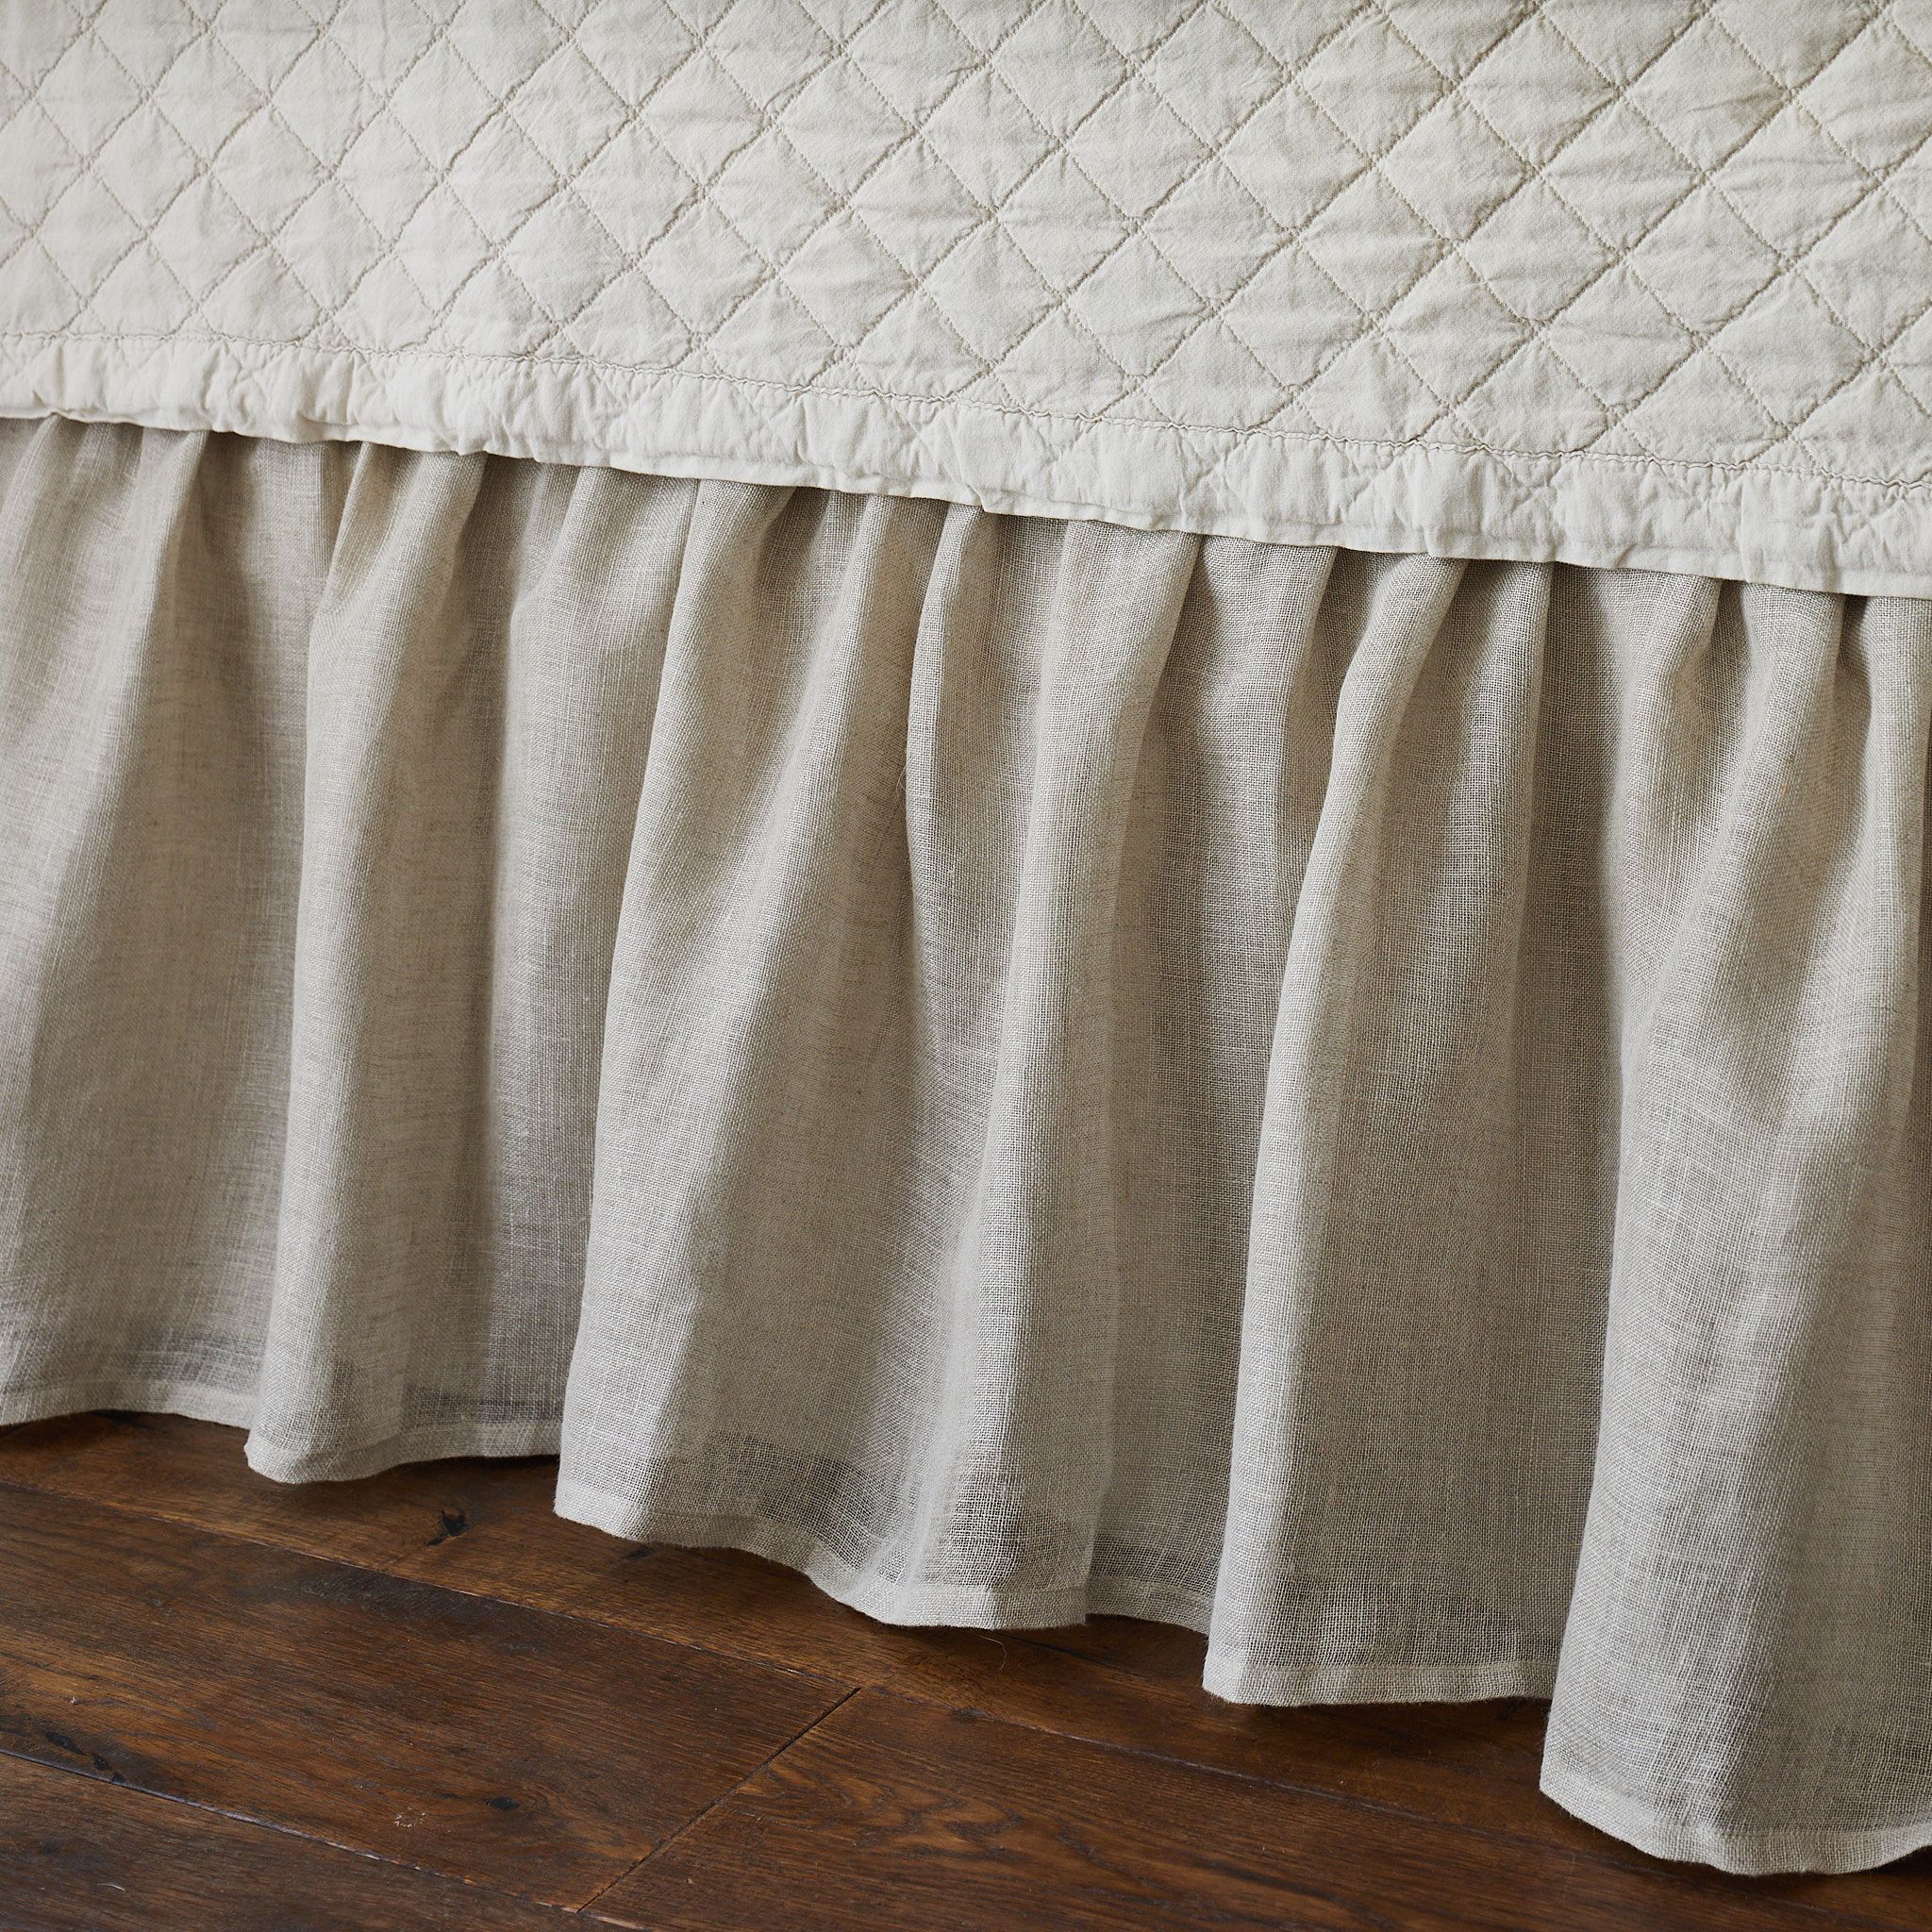 Linen Voile Natural Gathered Bed Skirt, Tan Bed Skirt King